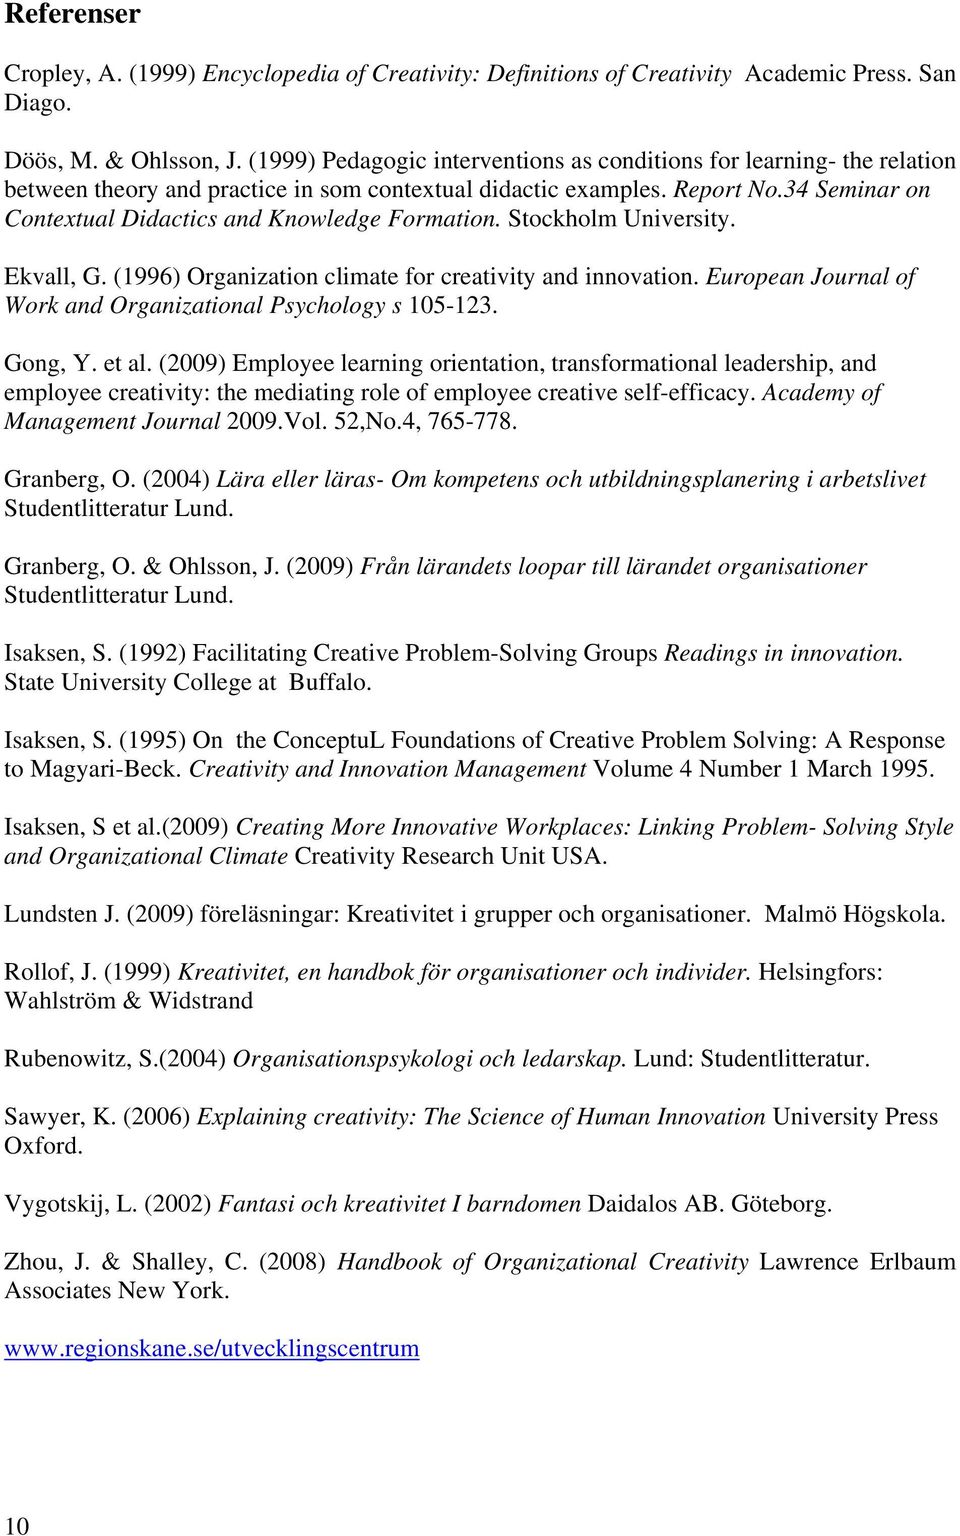 34 Seminar on Contextual Didactics and Knowledge Formation. Stockholm University. Ekvall, G. (1996) Organization climate for creativity and innovation.